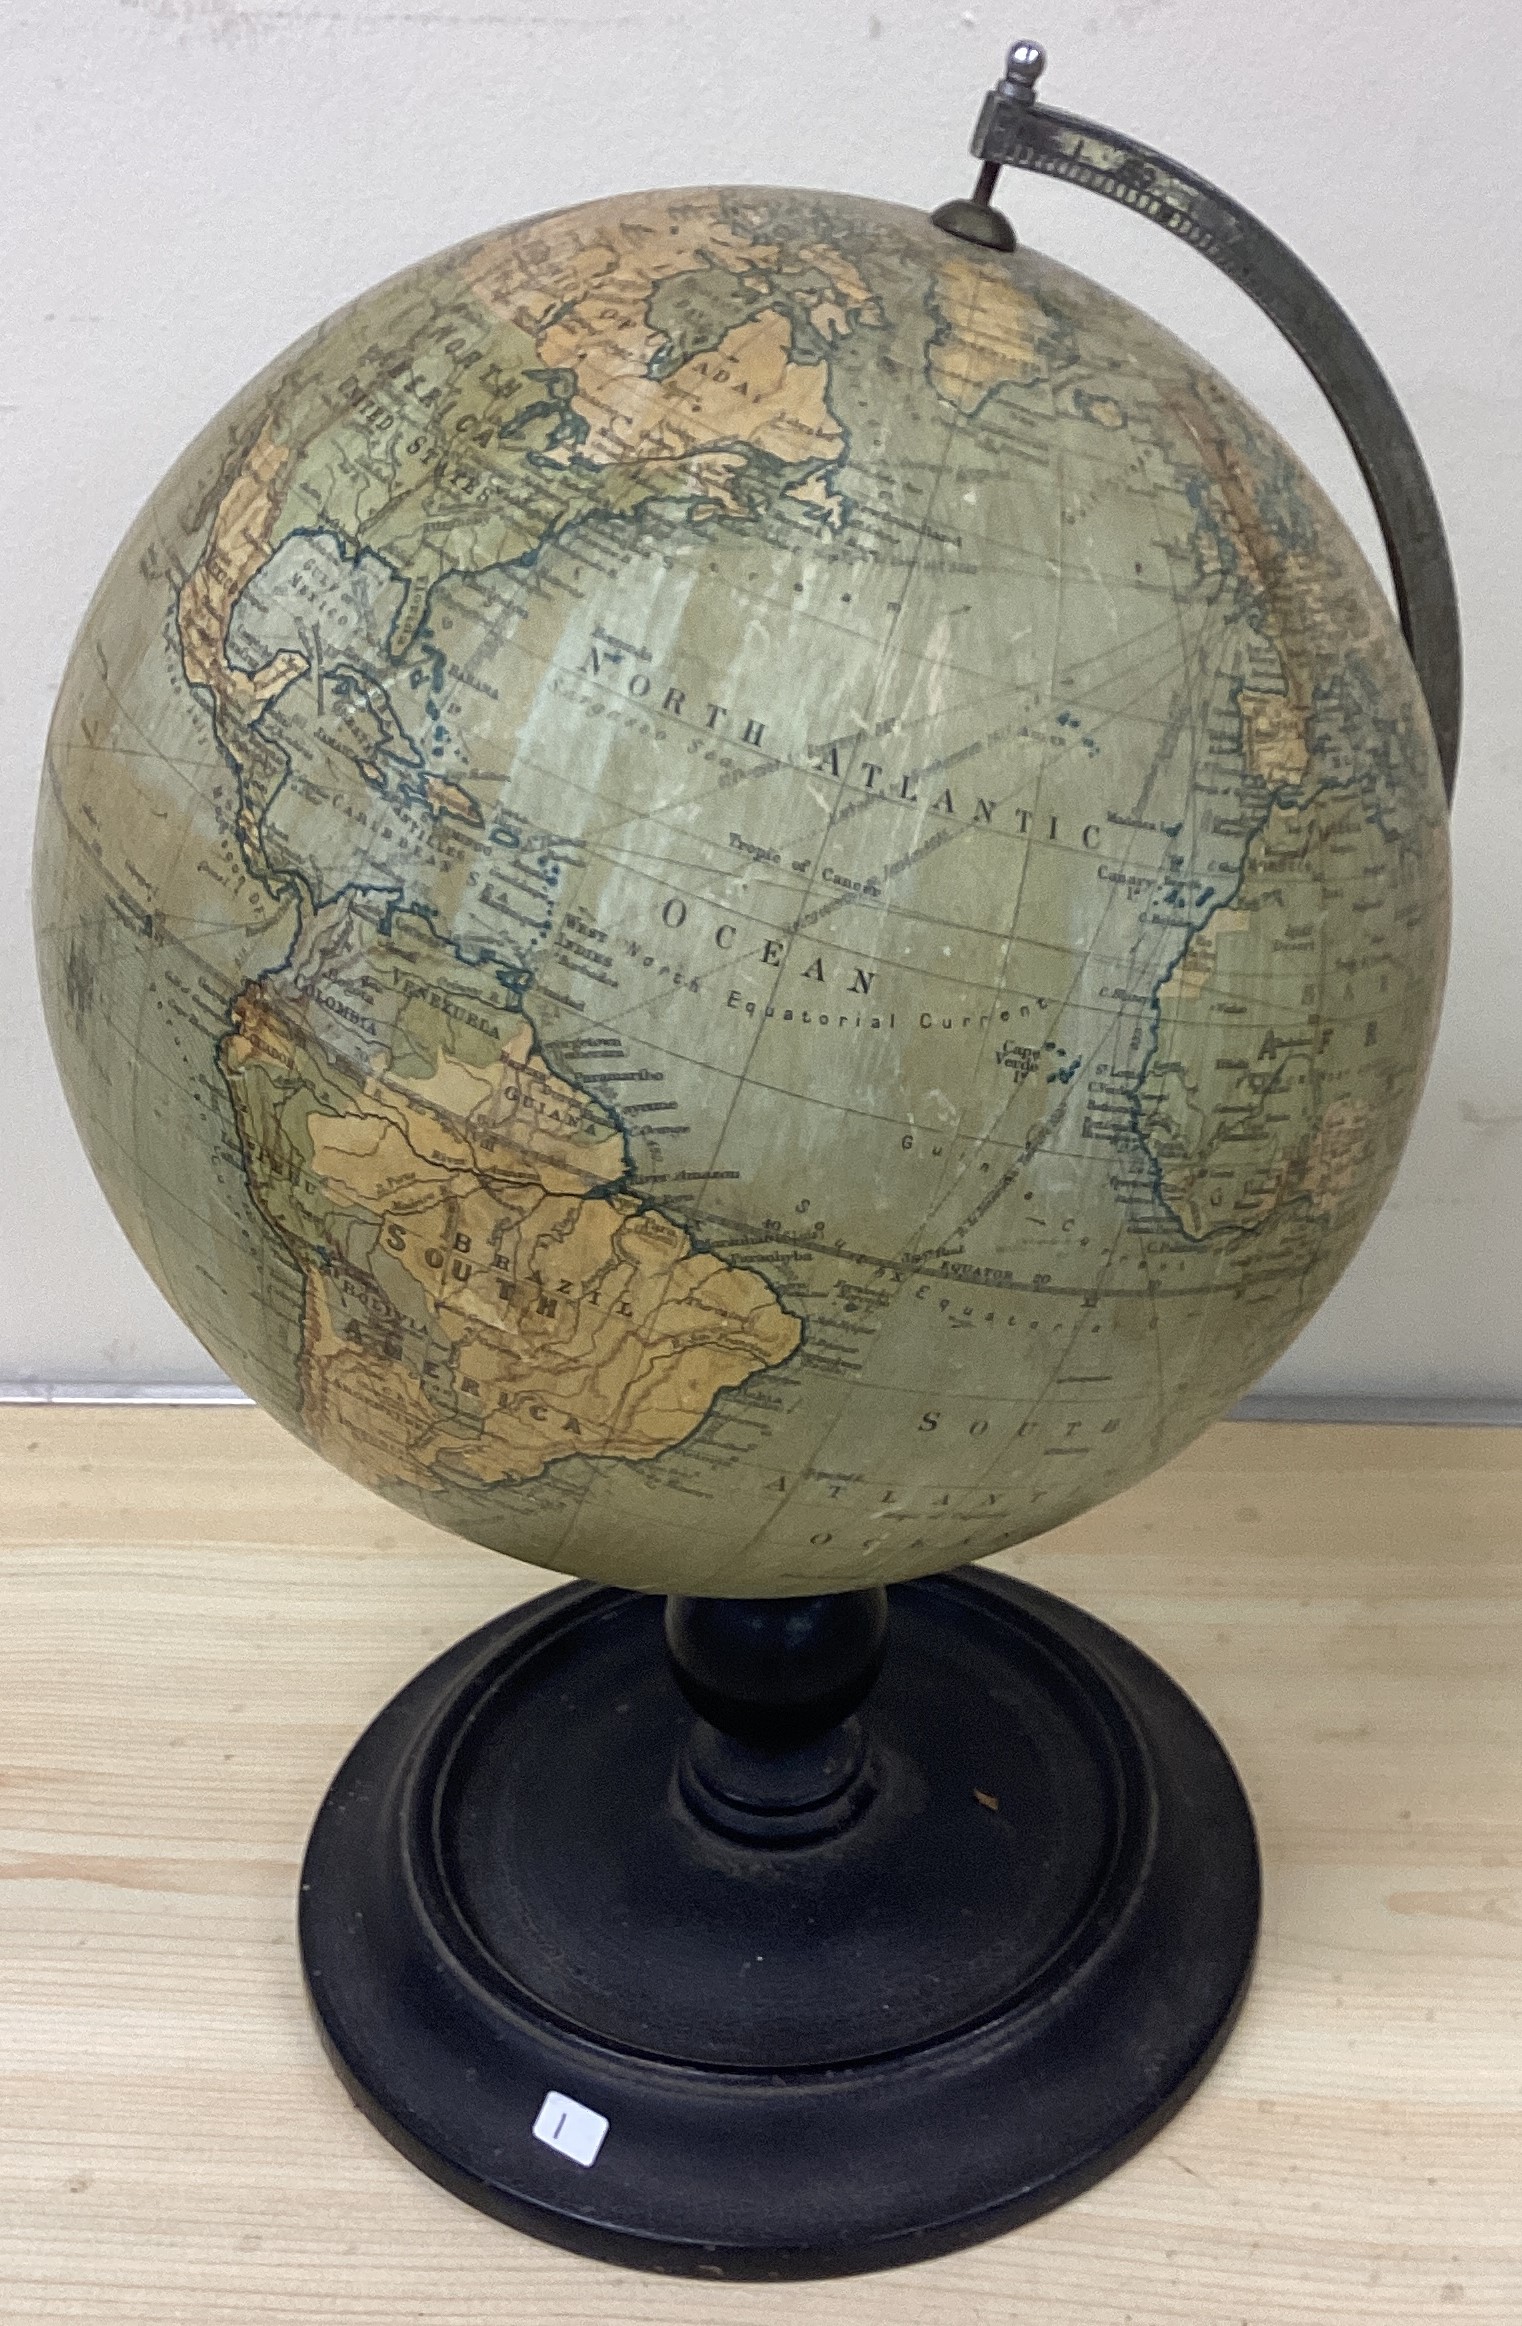 A globe on wooden stand. - Image 2 of 2